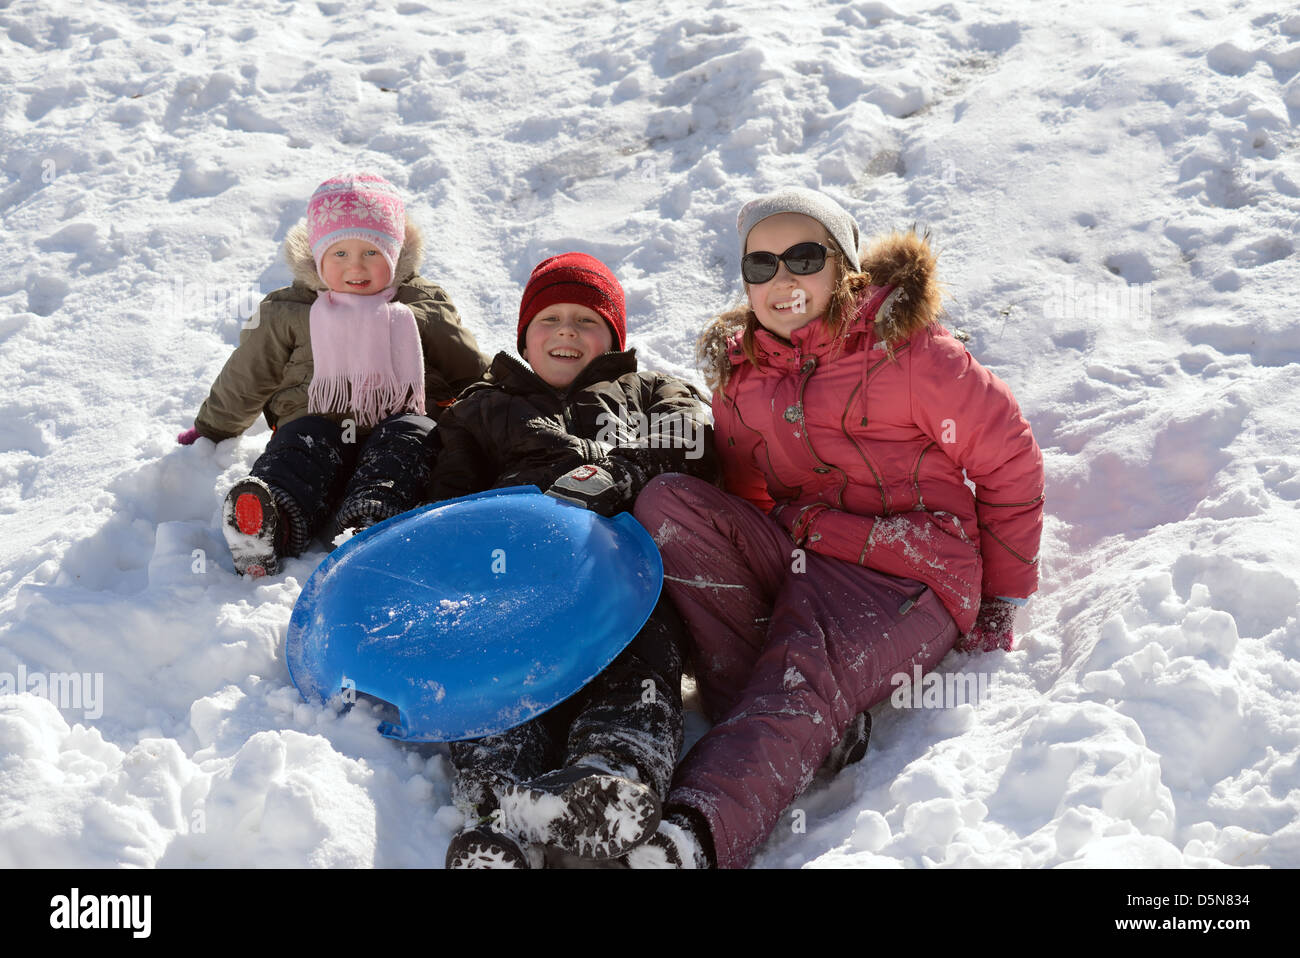 children playing in snow Stock Photo